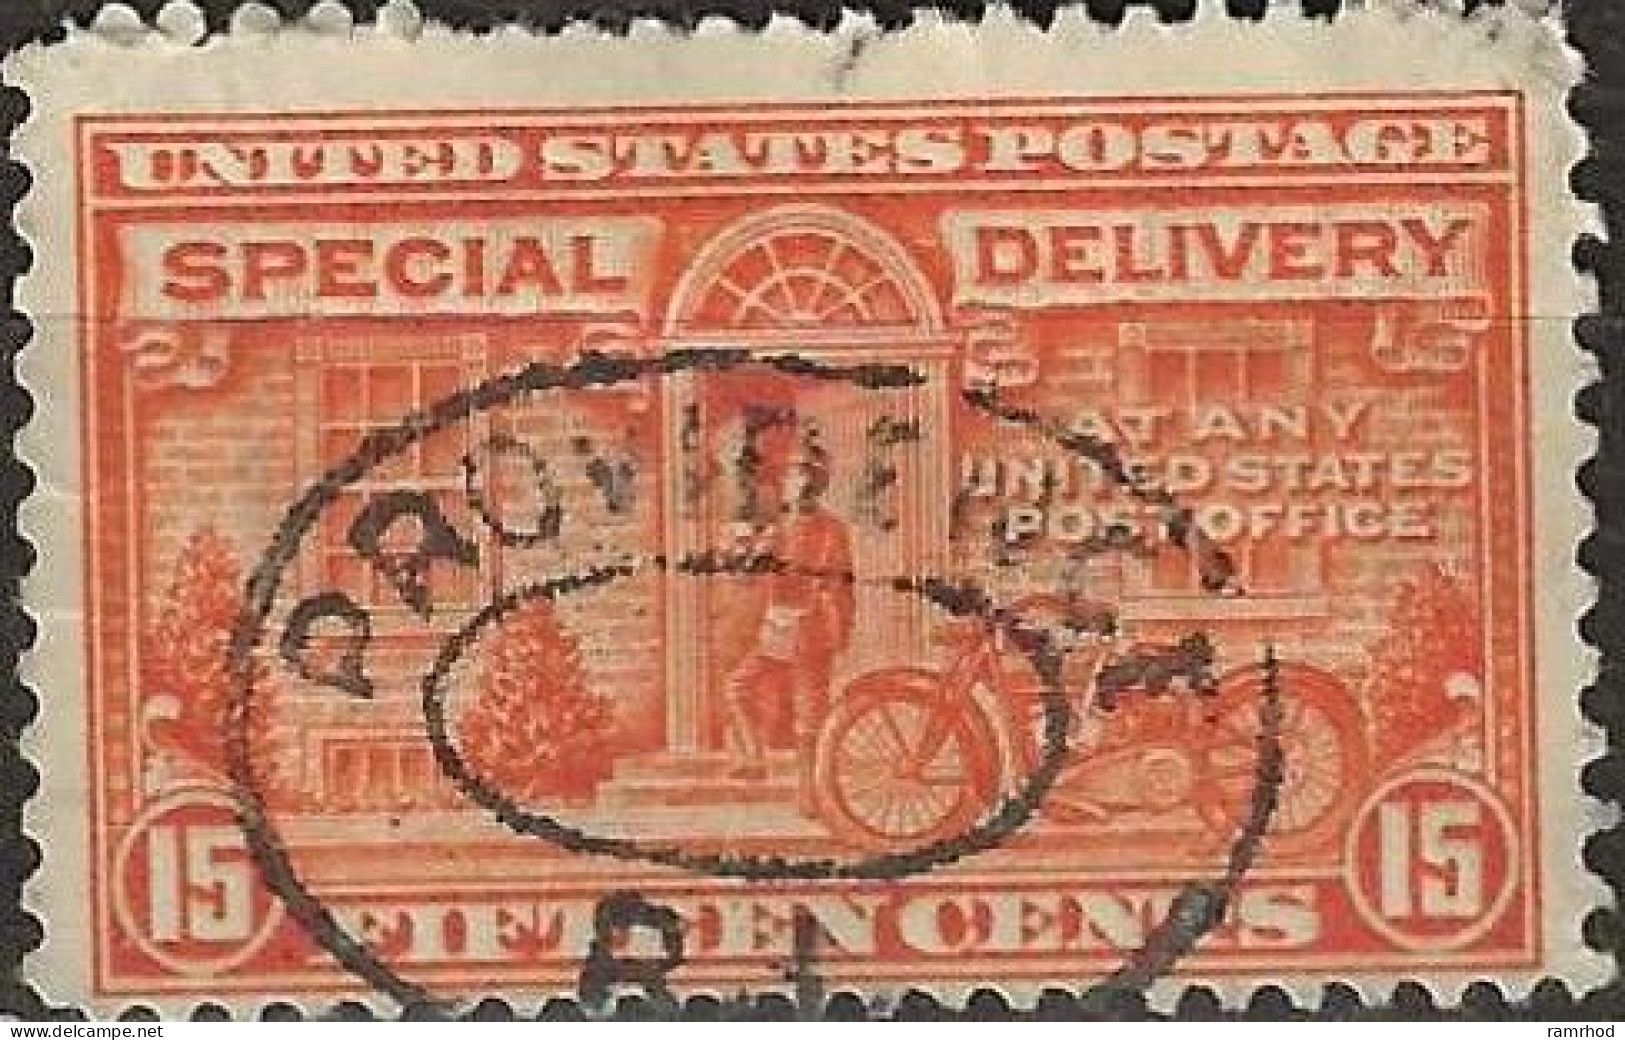 USA 1931 Special Delivery Stamps - 15c - Delivery By Motorcycle FU - Express & Recommandés